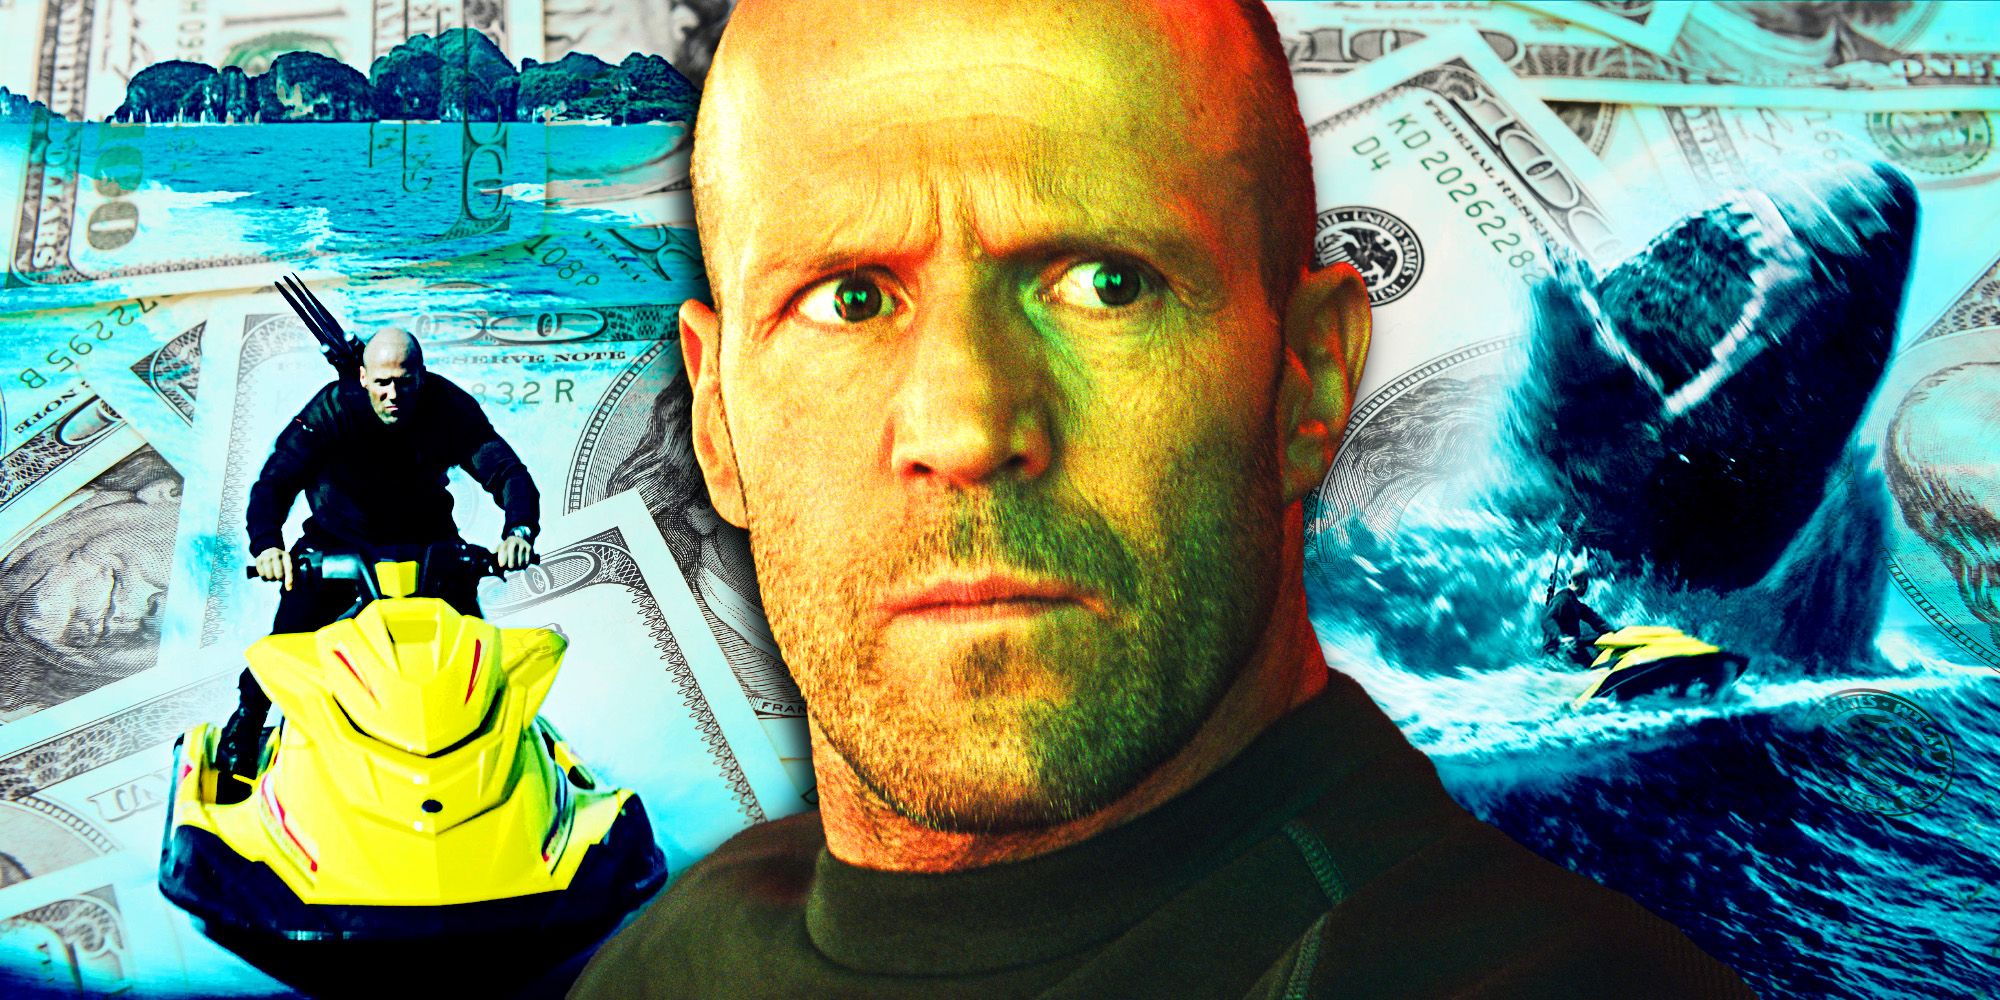 A custom image of Jason Statham looking stern against a backdrop of images from The Meg